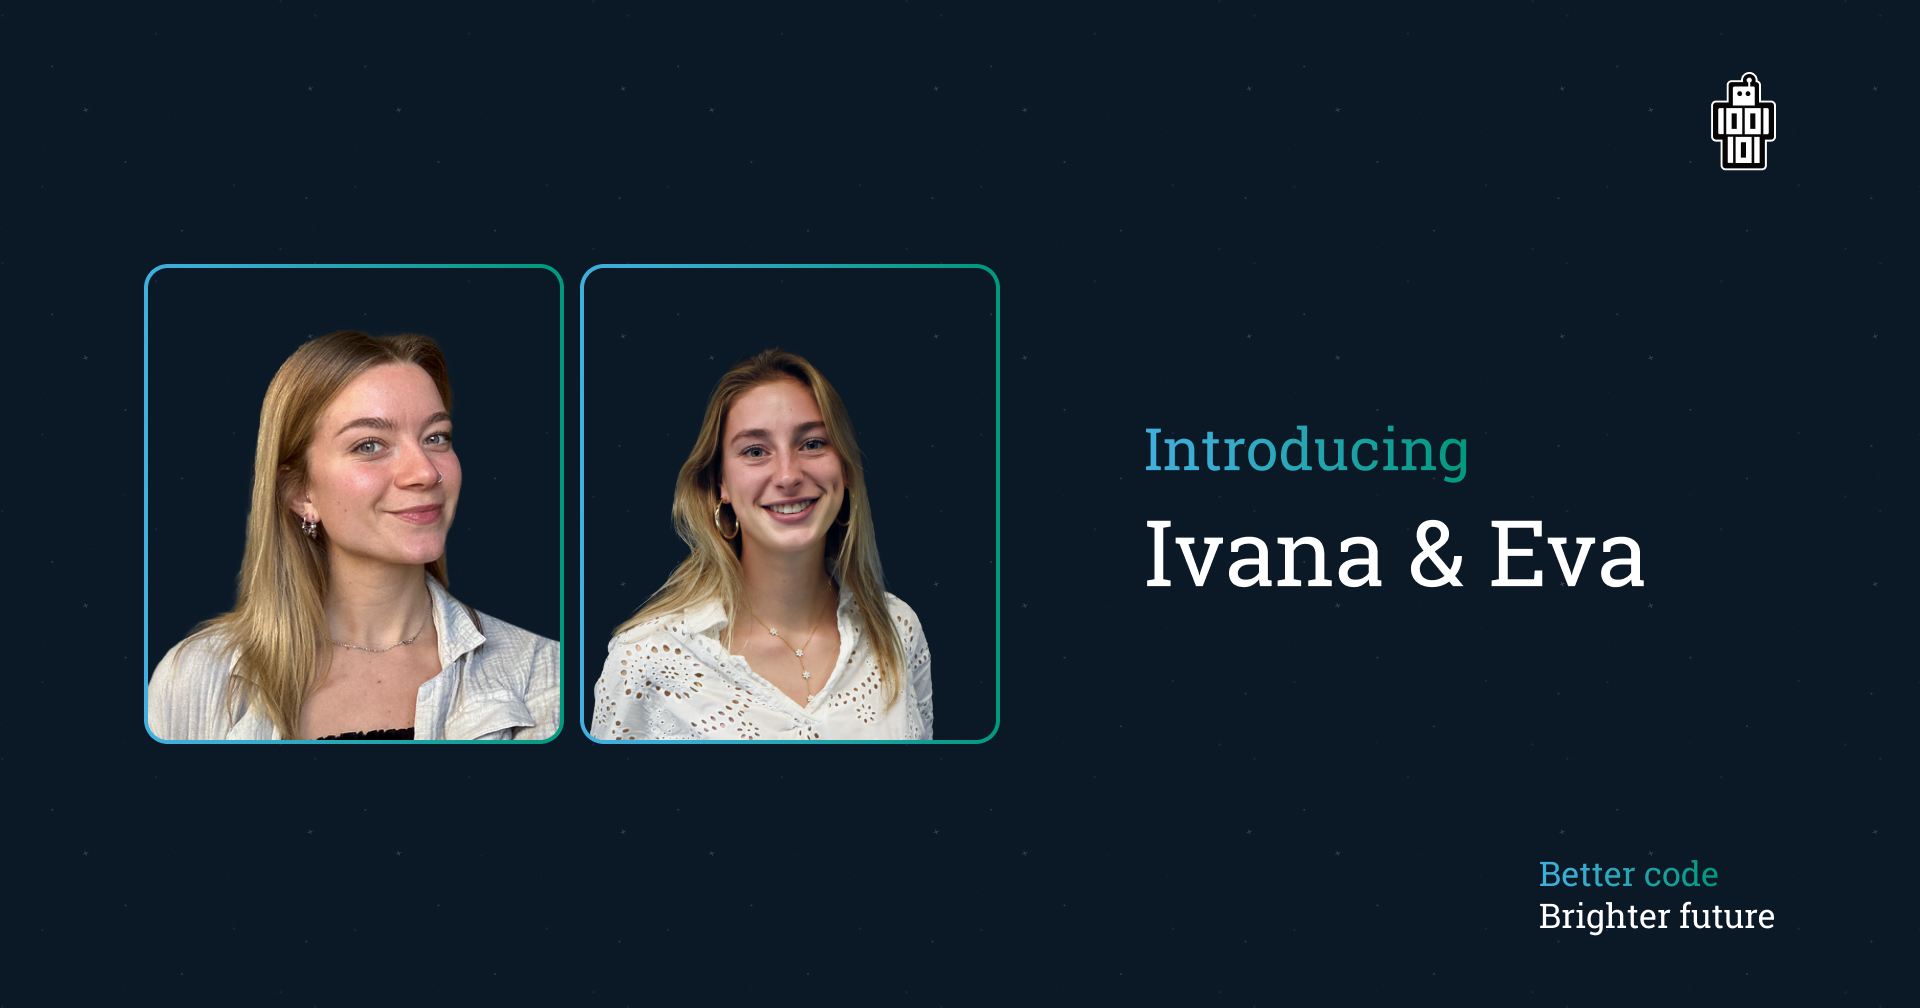 Meet Eva and Ivana - We have further strengthened our team! Meet Eva and Ivana.